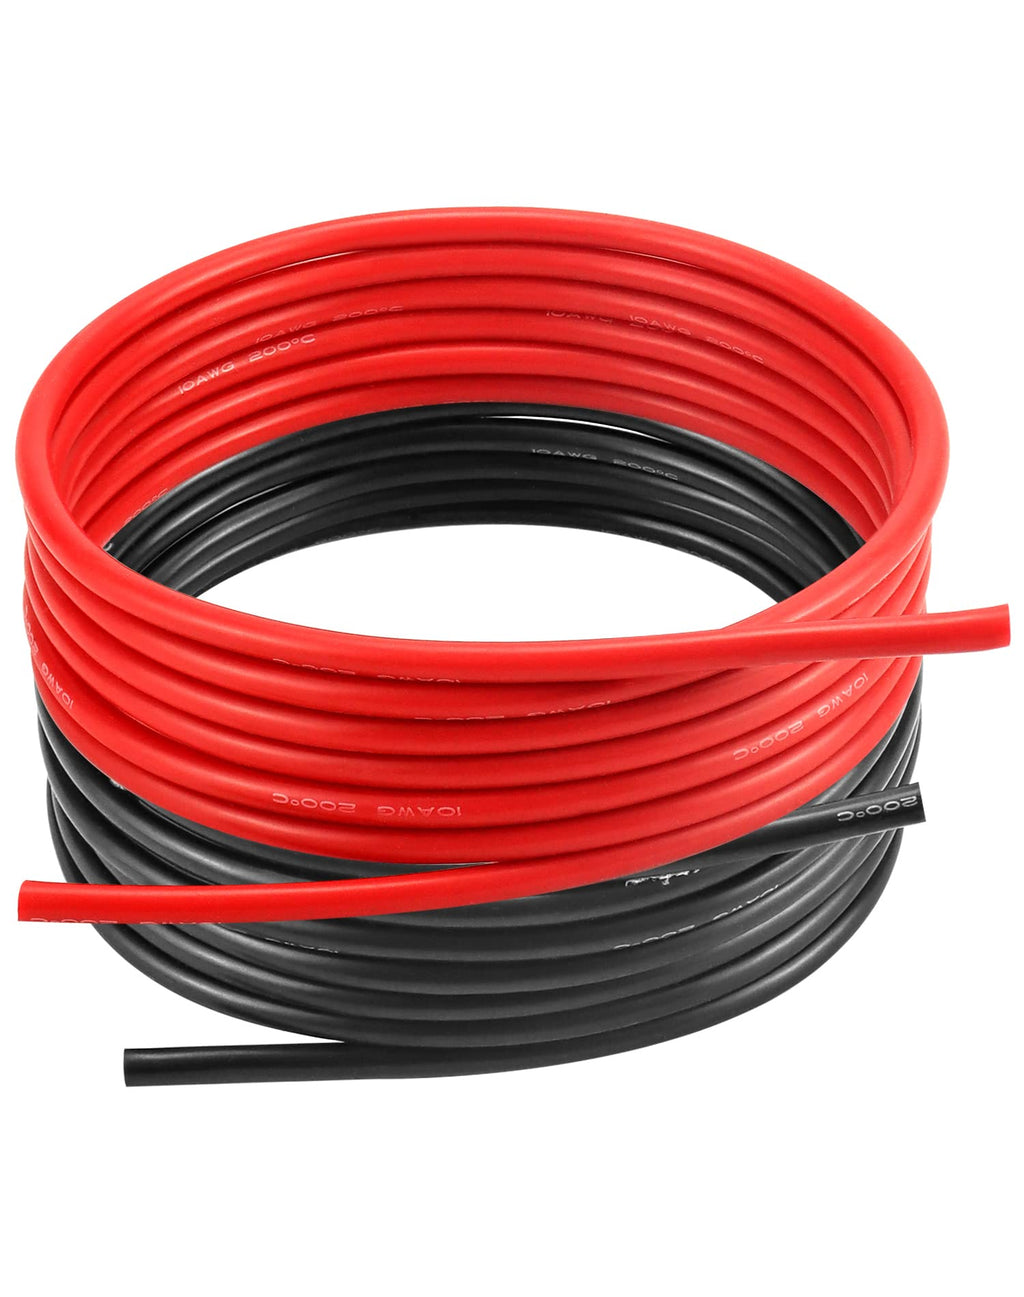  [AUSTRALIA] - QWORK 10AWG 6mm² silicone electronics cable - 2.5M black and 2.5M red - 10 gauge silicone wire car cable flexible and soft low impedance 1050 strands OFC tinned wires 10 awg 5m